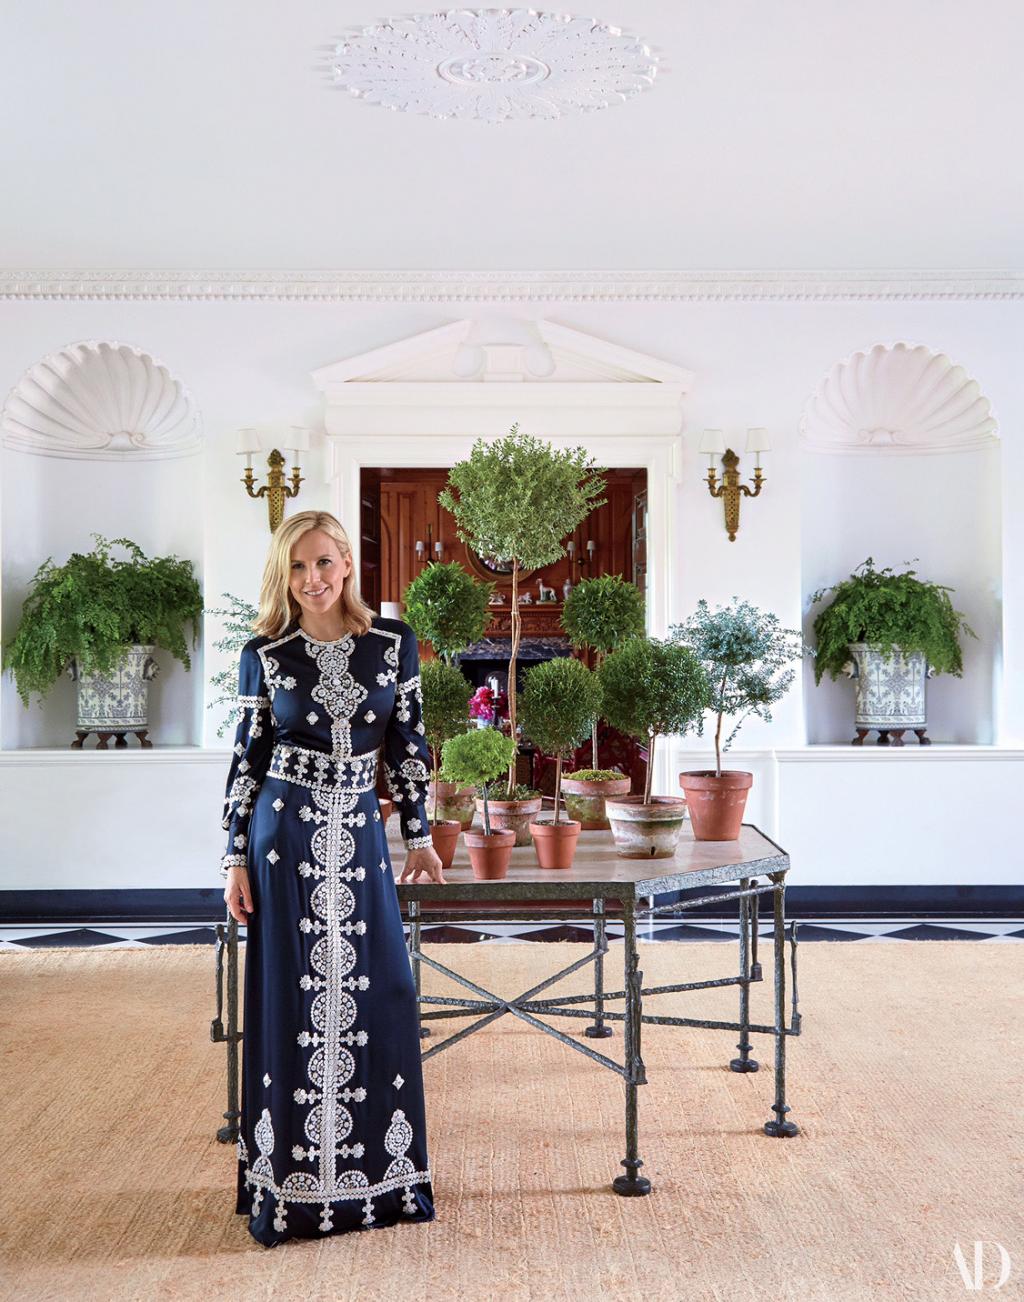 Tory Burchâ€™s Epic, 15,000-Square-Foot Summer House is One of the Biggest in the Hamptons: SeeÂ Inside